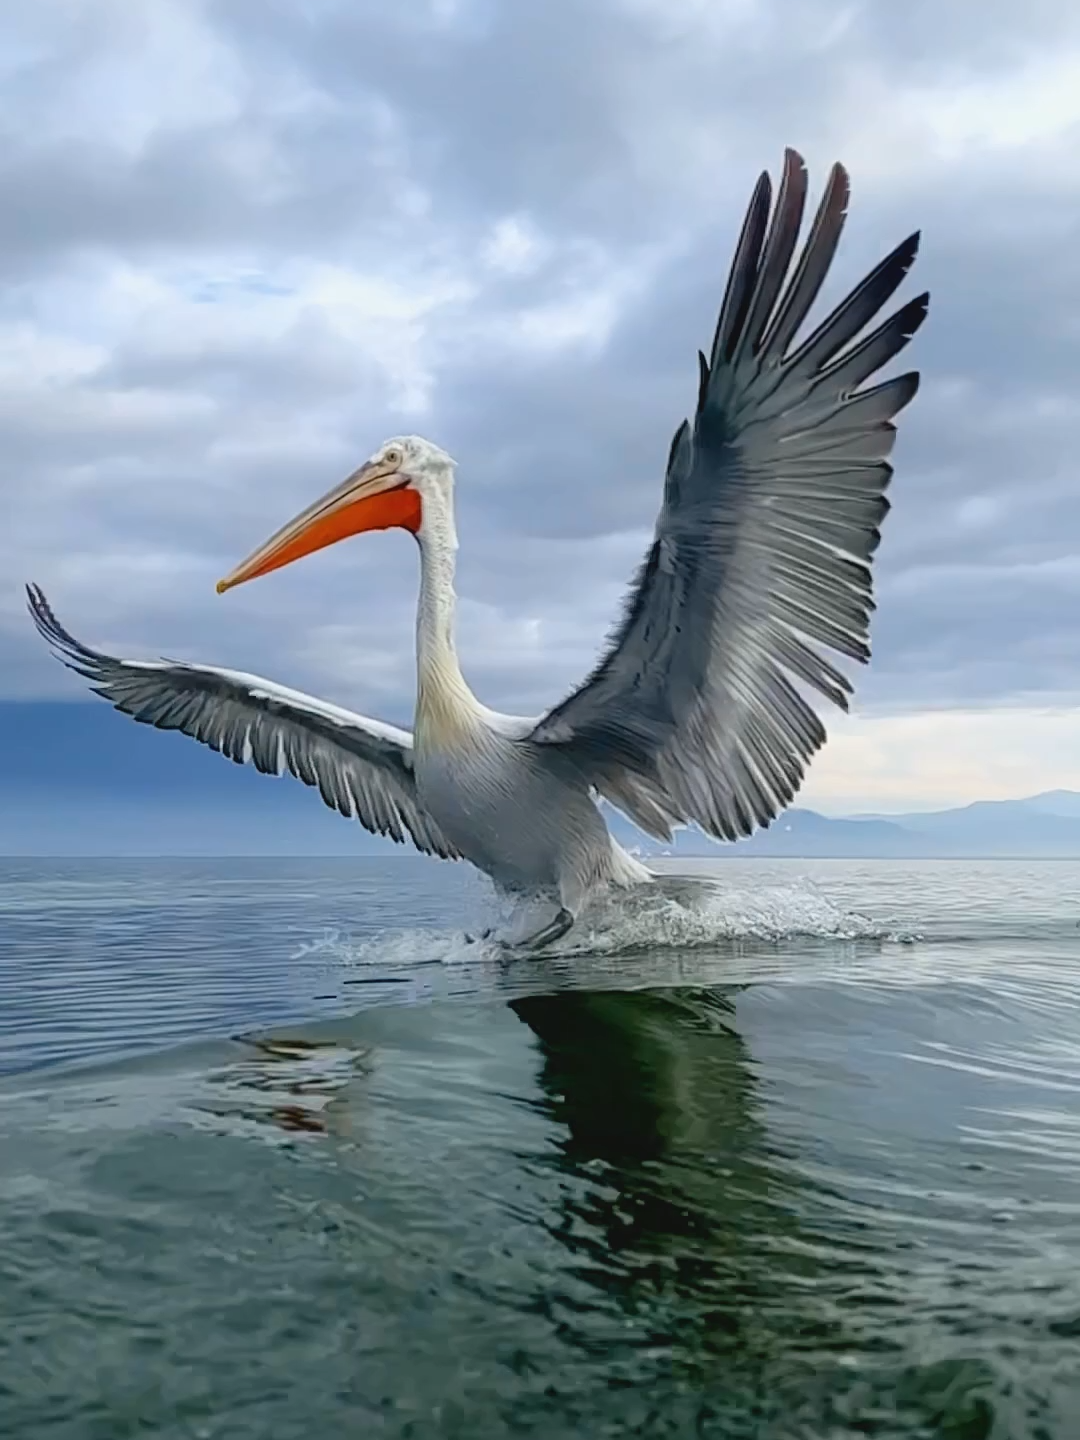 This is a Dalmatian pelican and they are found in Central Eurasia and can grow up to 1.8 meters in length with a wingspan exceeding 3.5 meters. What bird species fascinates you the most, and why? 📽 @seanweekly 📍 Northern Greece #pelican #animals #nature #dalmatianpelicans #travel